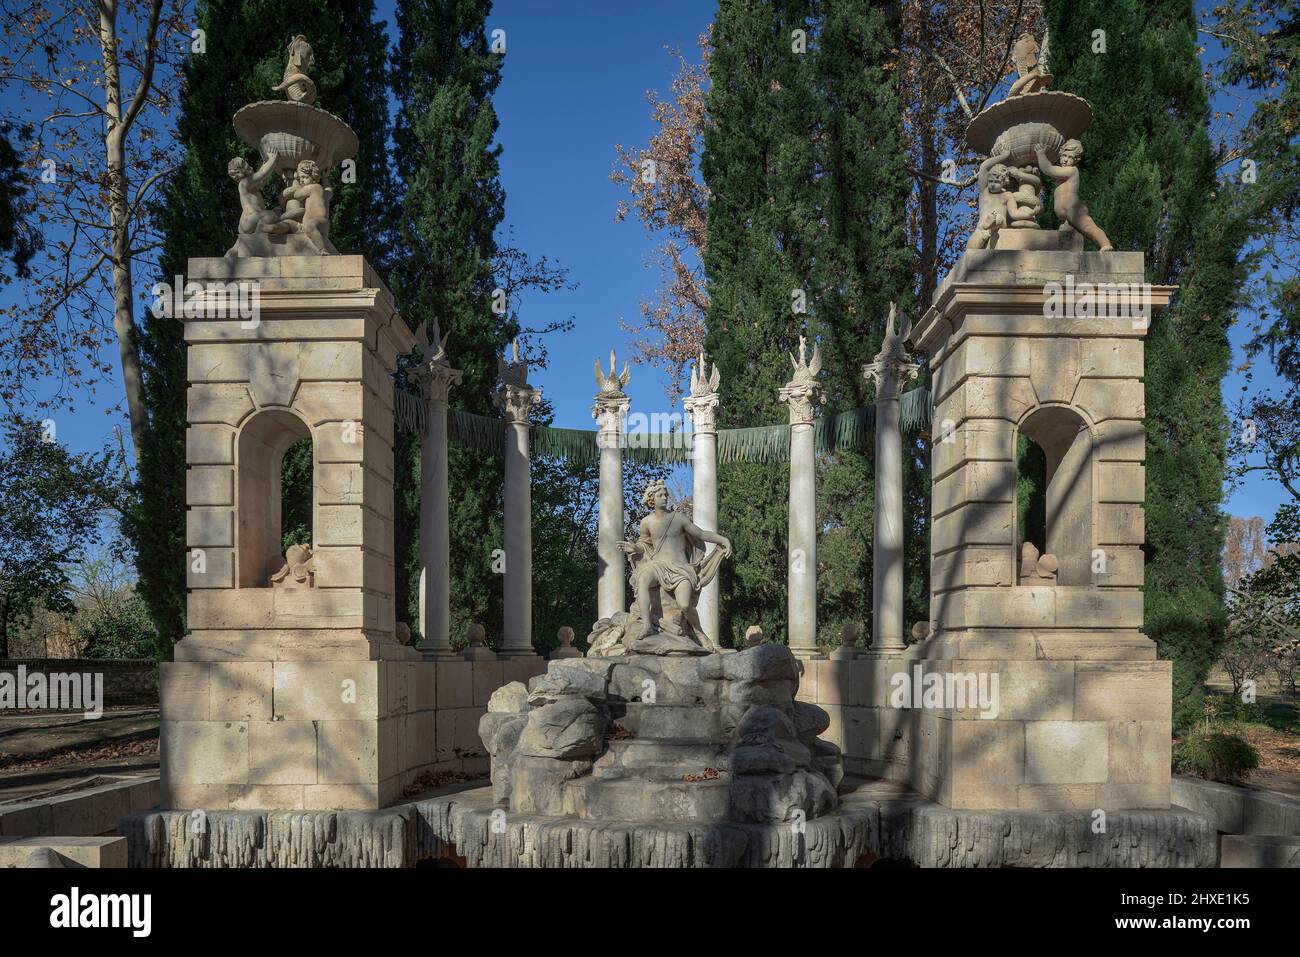 Fountain of Apollo god of beauty on top of a rococo-style Carrara marble pedestal in the Prince's Garden. Aranjuez, Madrid, Europe Stock Photo